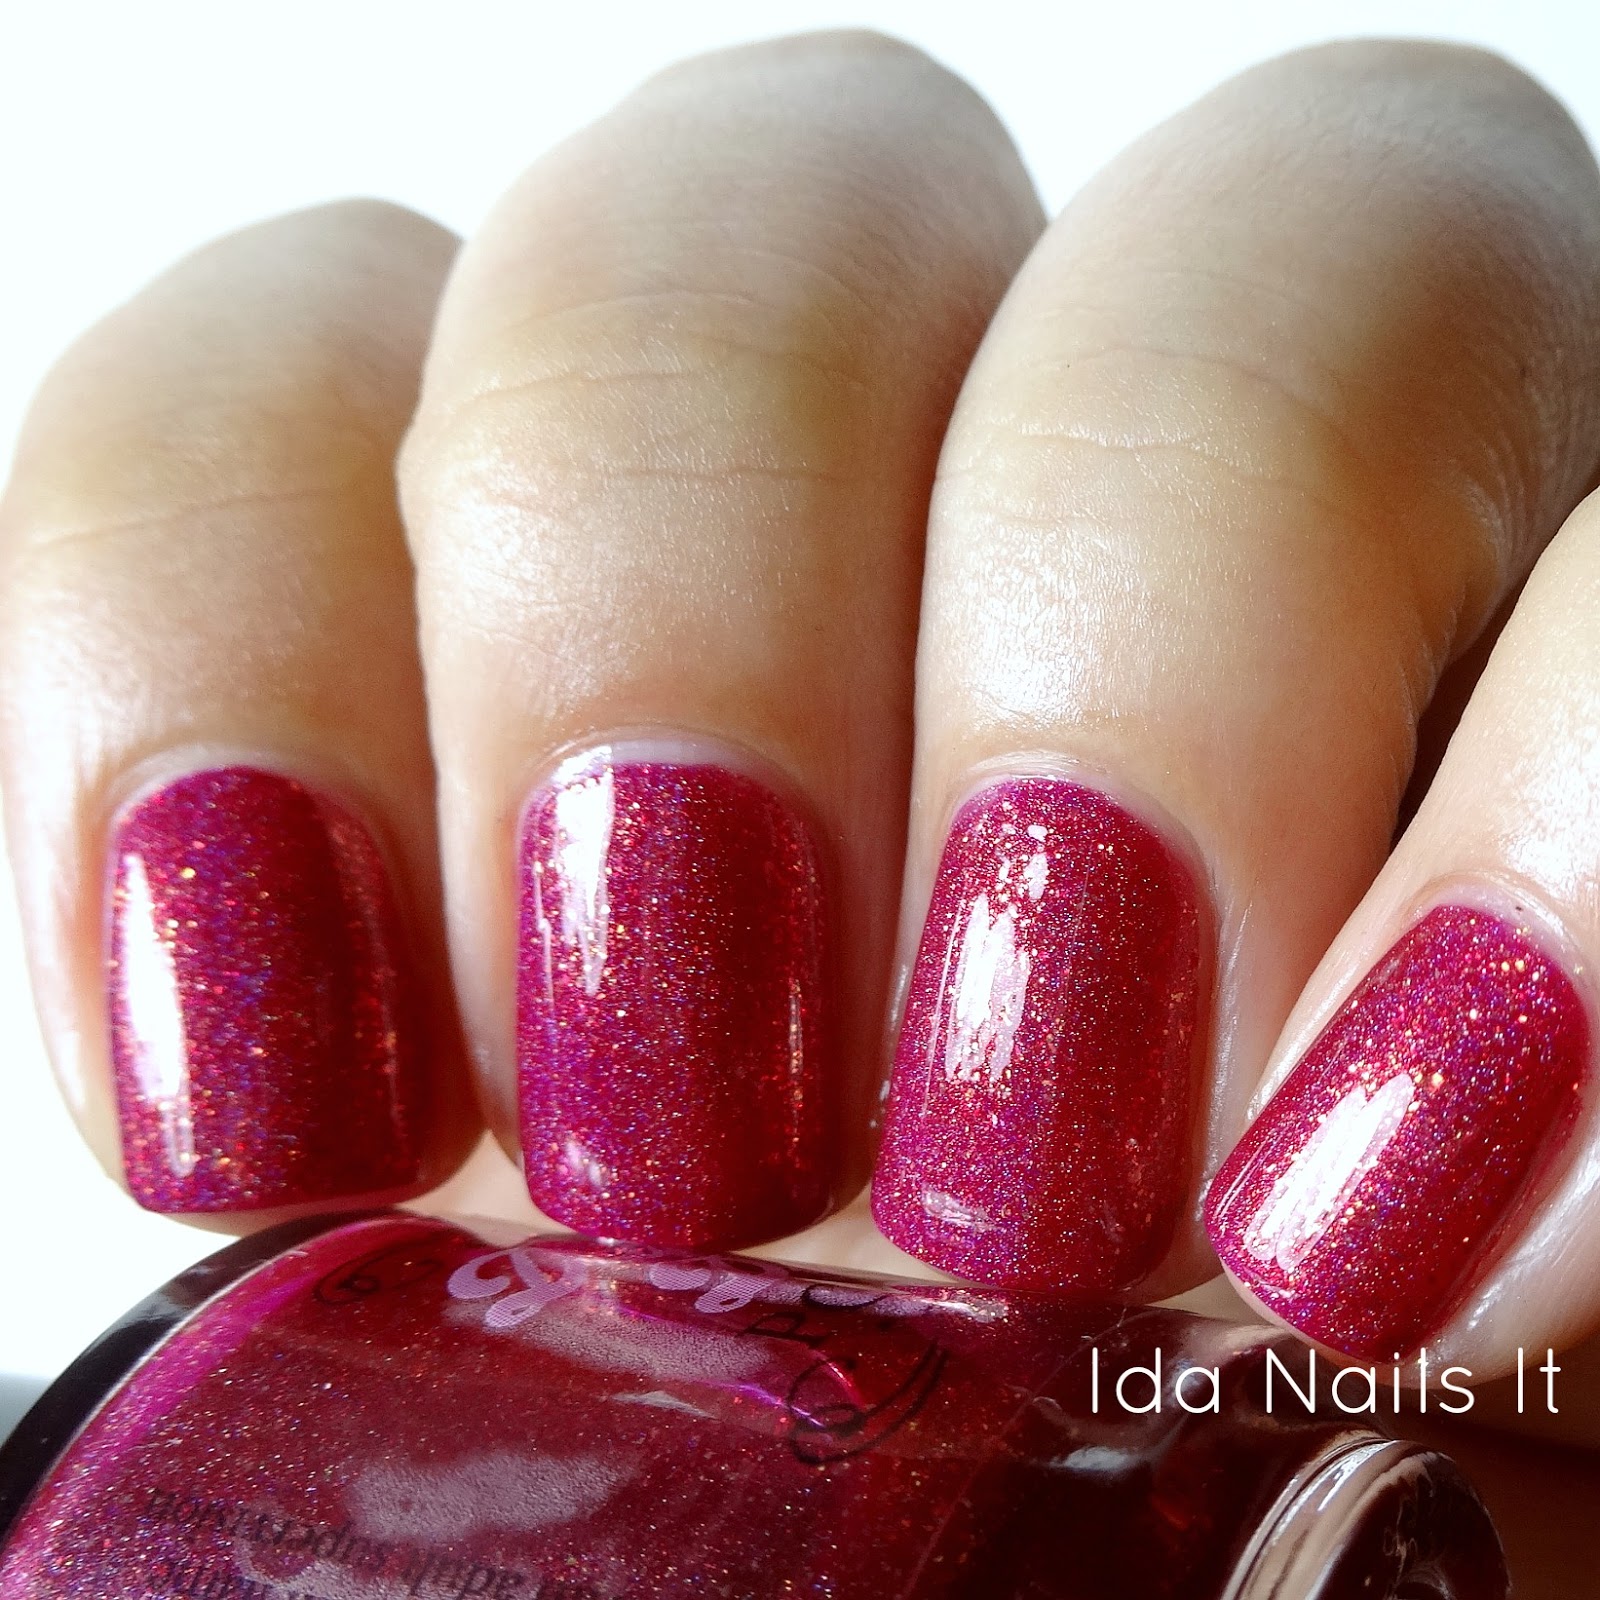 Ida Nails It: Darling Diva Polish BSC Collection: Swatches and Review